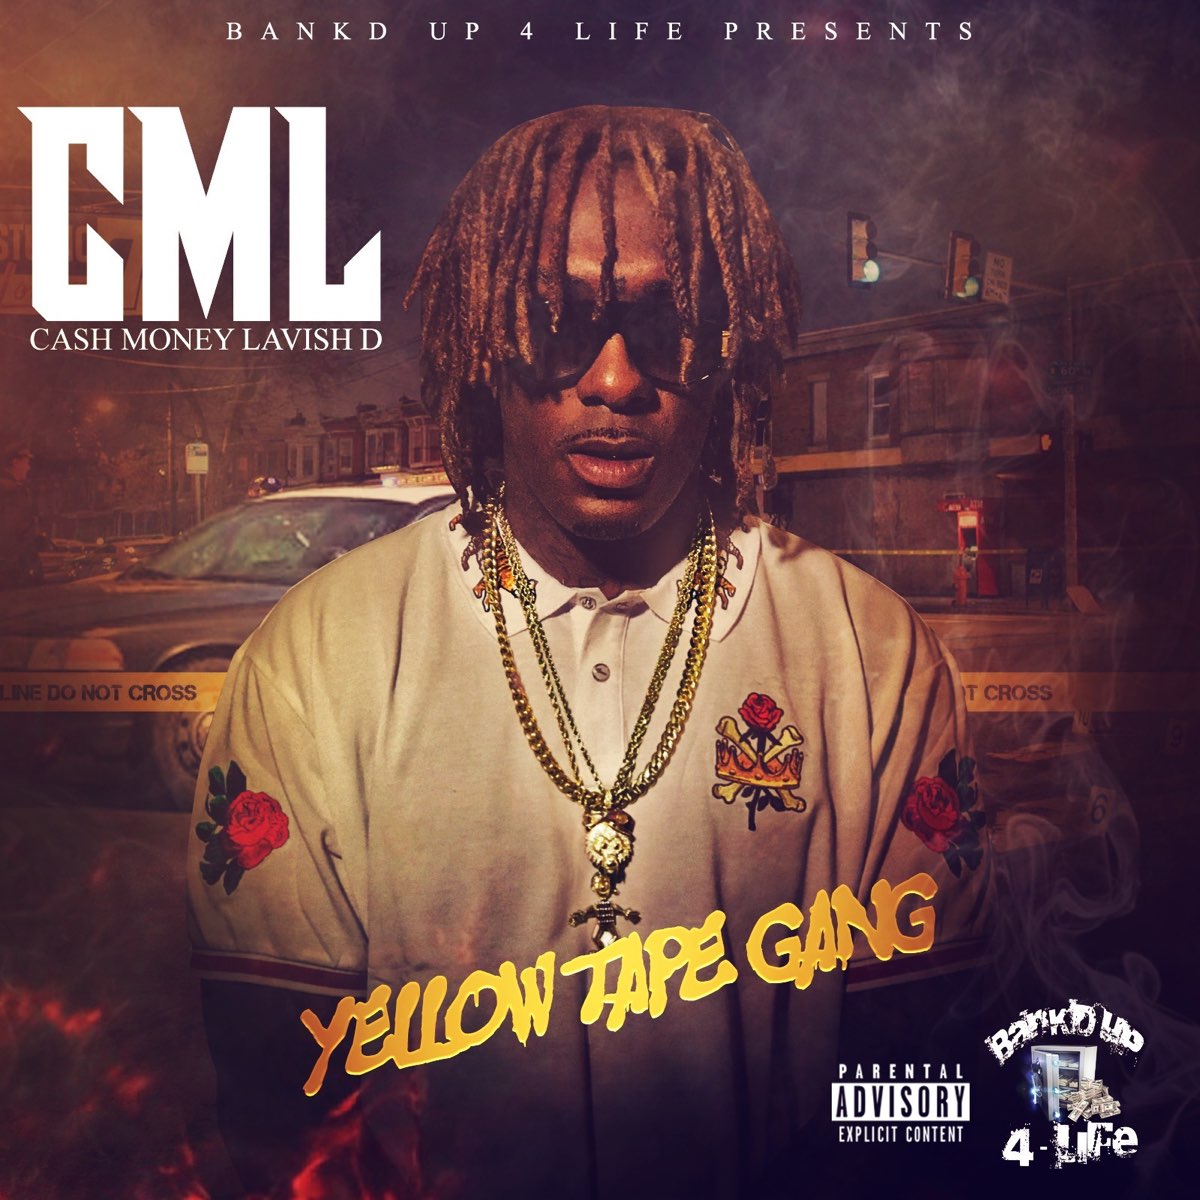 CML - Yellow Tape Gang